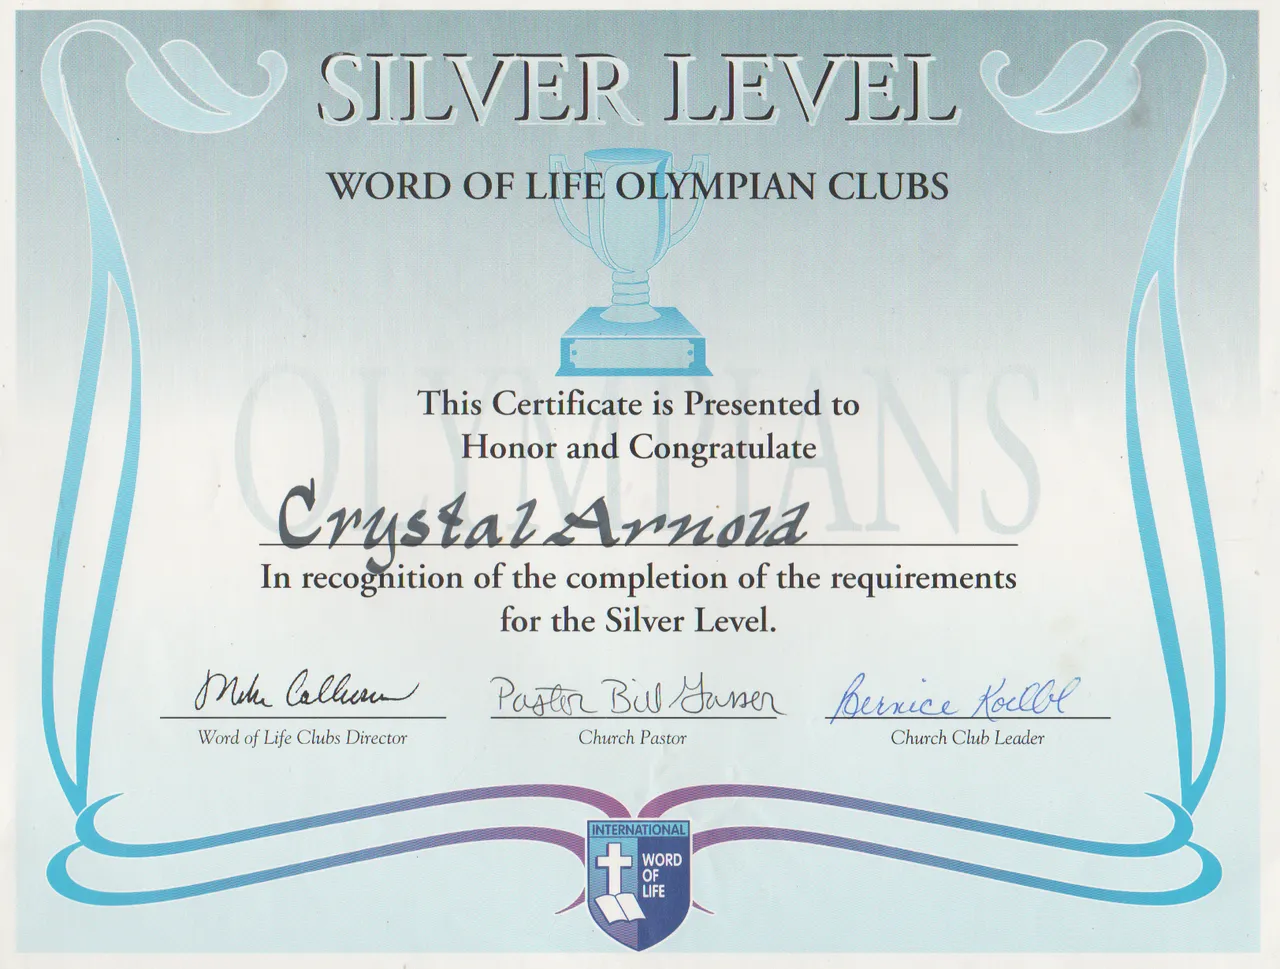 2001 maybe - HCBC - Olympians - Crystal Arnold - Silver Level Completed.png